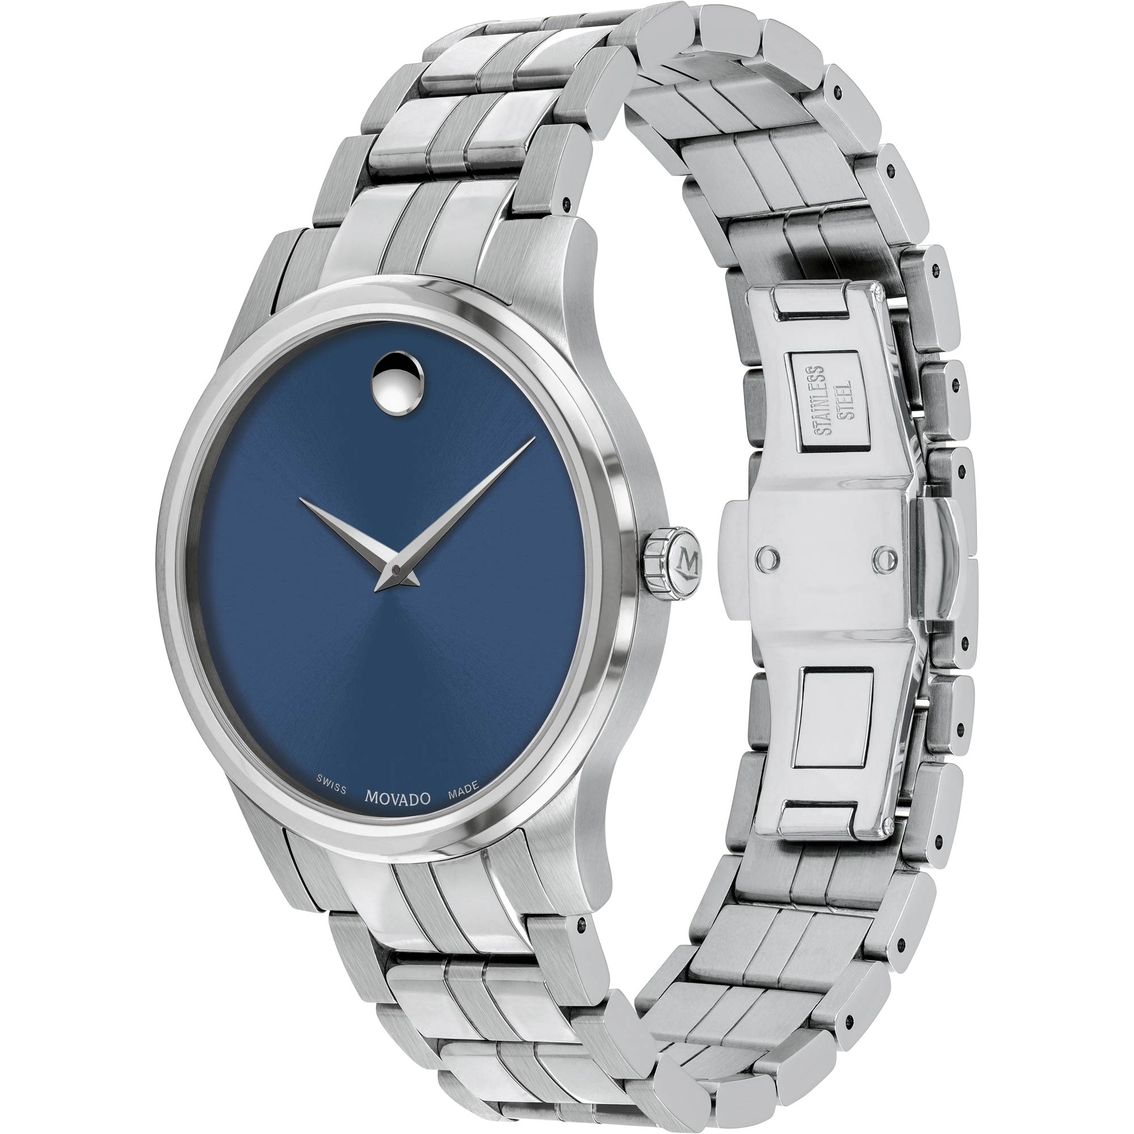 Movado Men's Military Special Watch 0607534 - Image 3 of 3